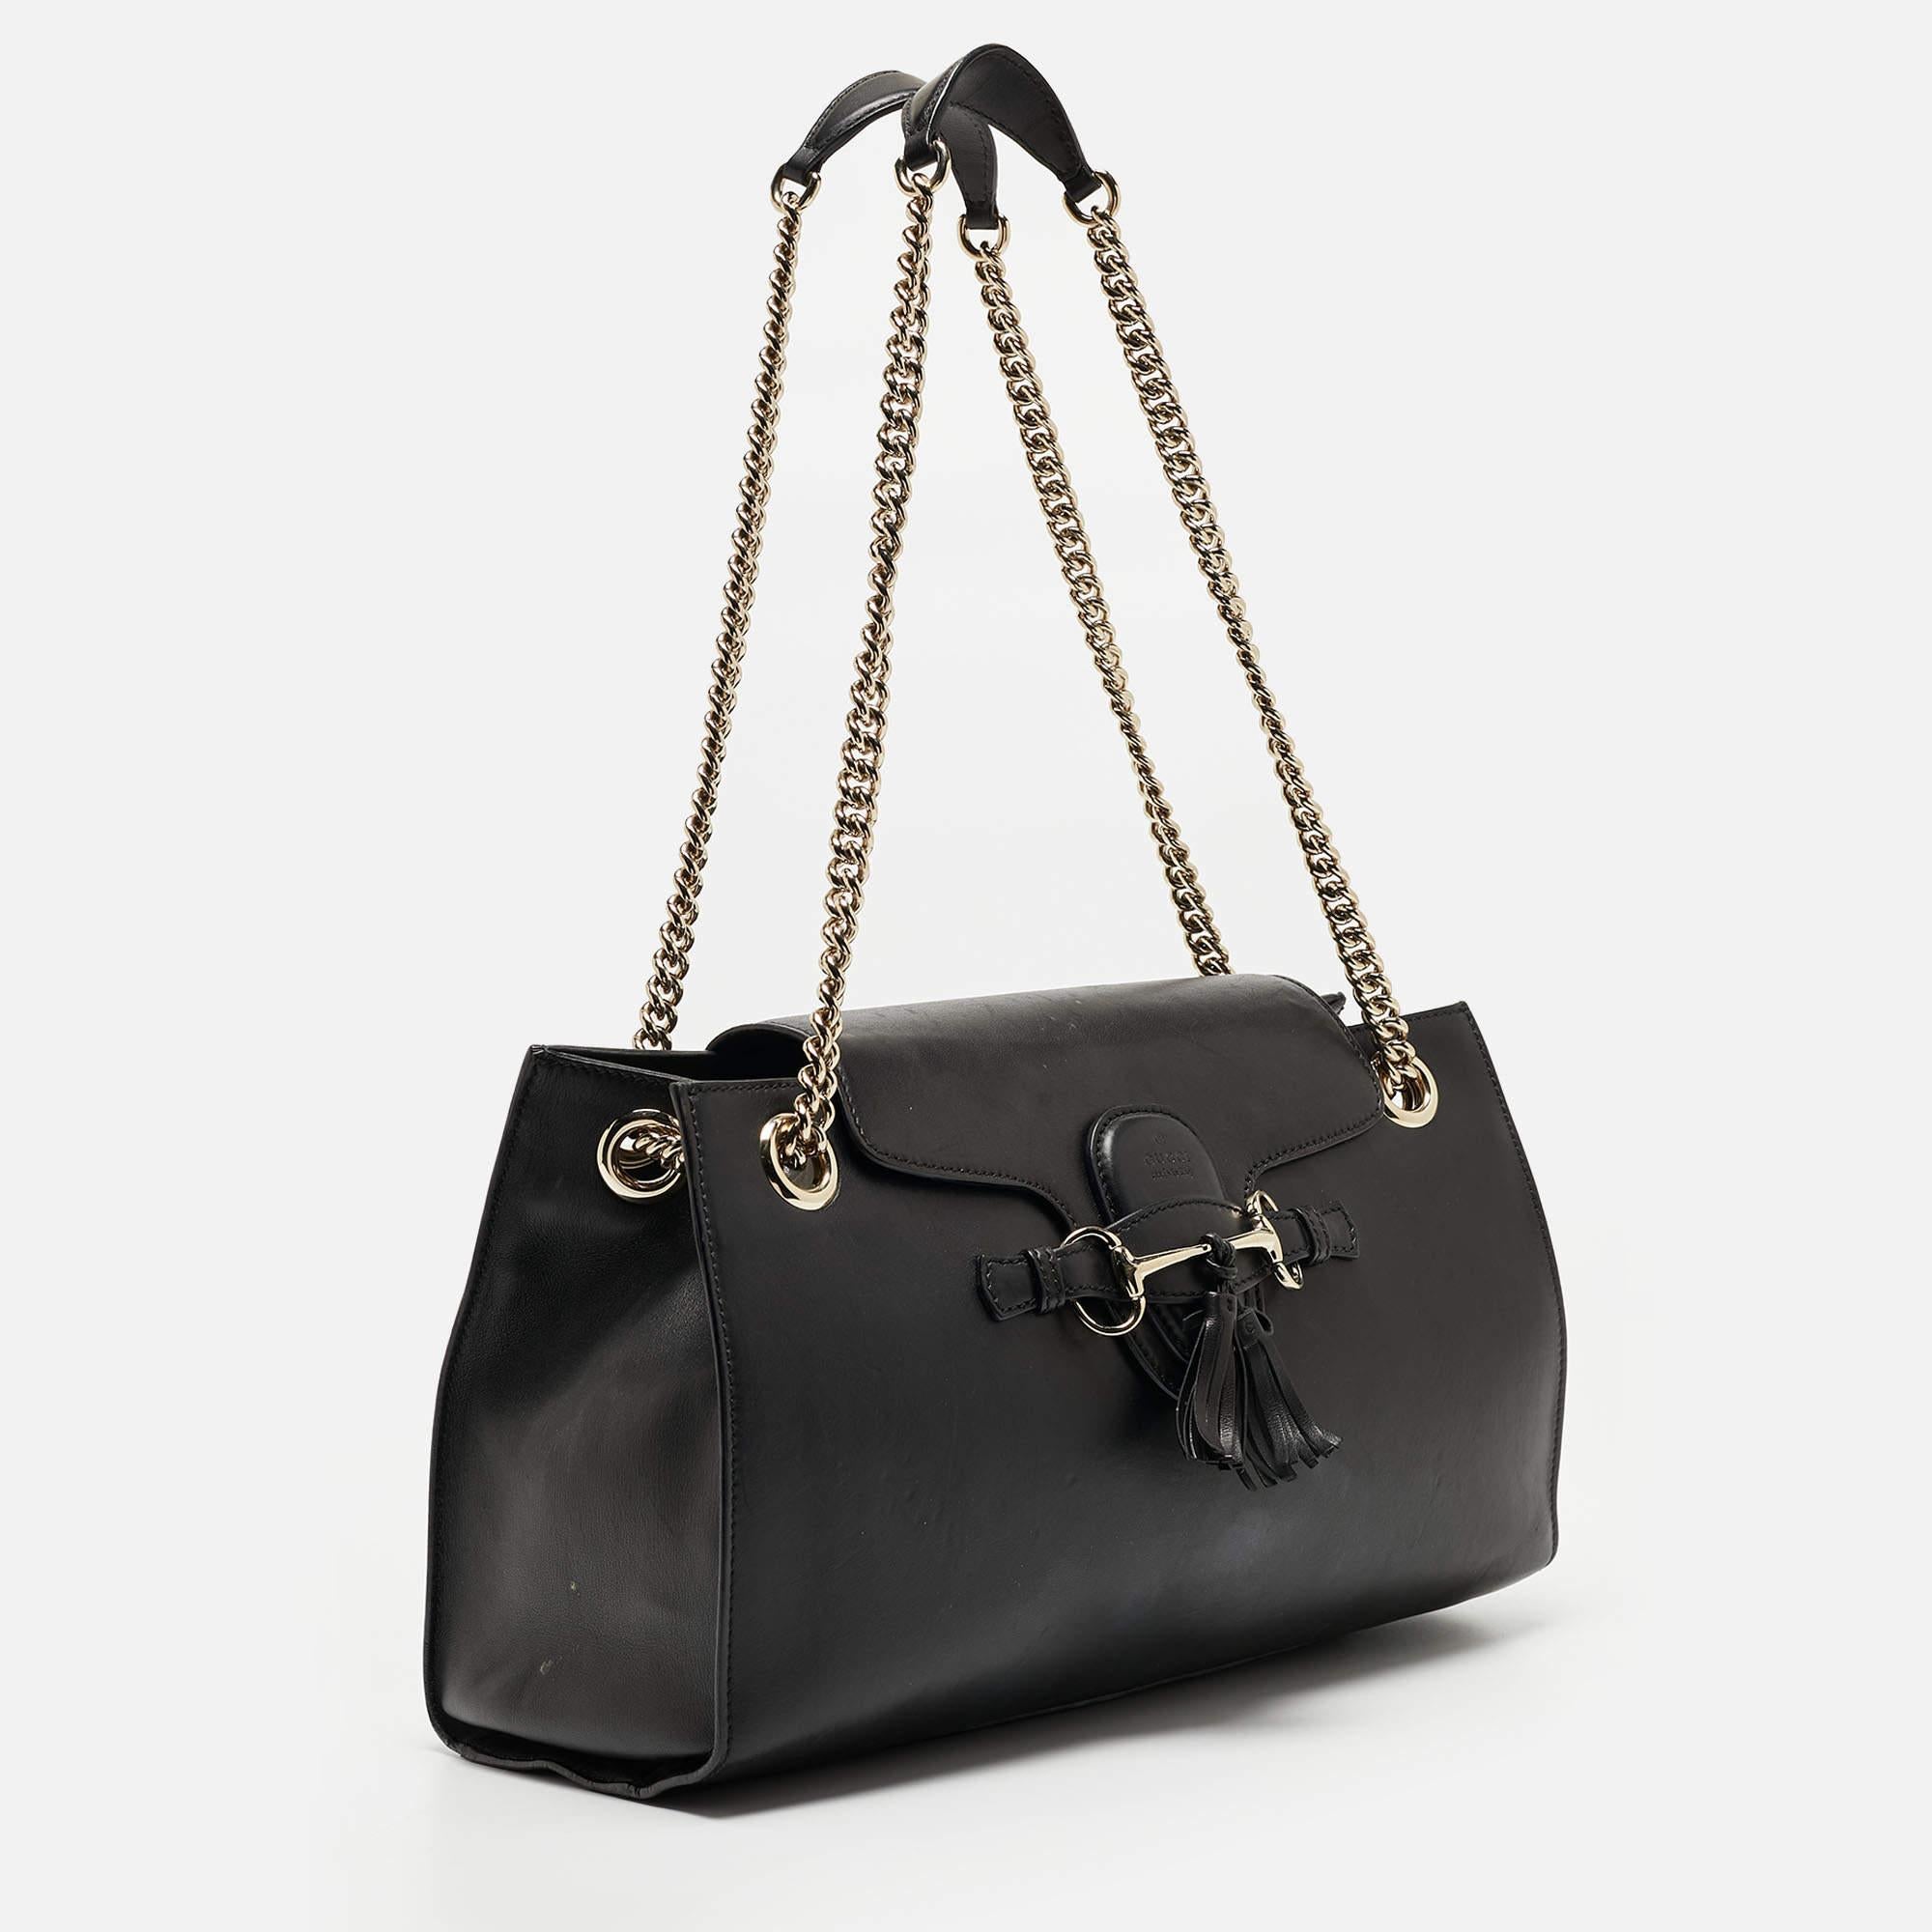 Gucci's handbags are not only well-crafted, but they are also coveted because of their high appeal. This Emily Chain shoulder bag, like all of Gucci's creations, is fabulous and closet-worthy. It has been crafted from leather and styled with a flap